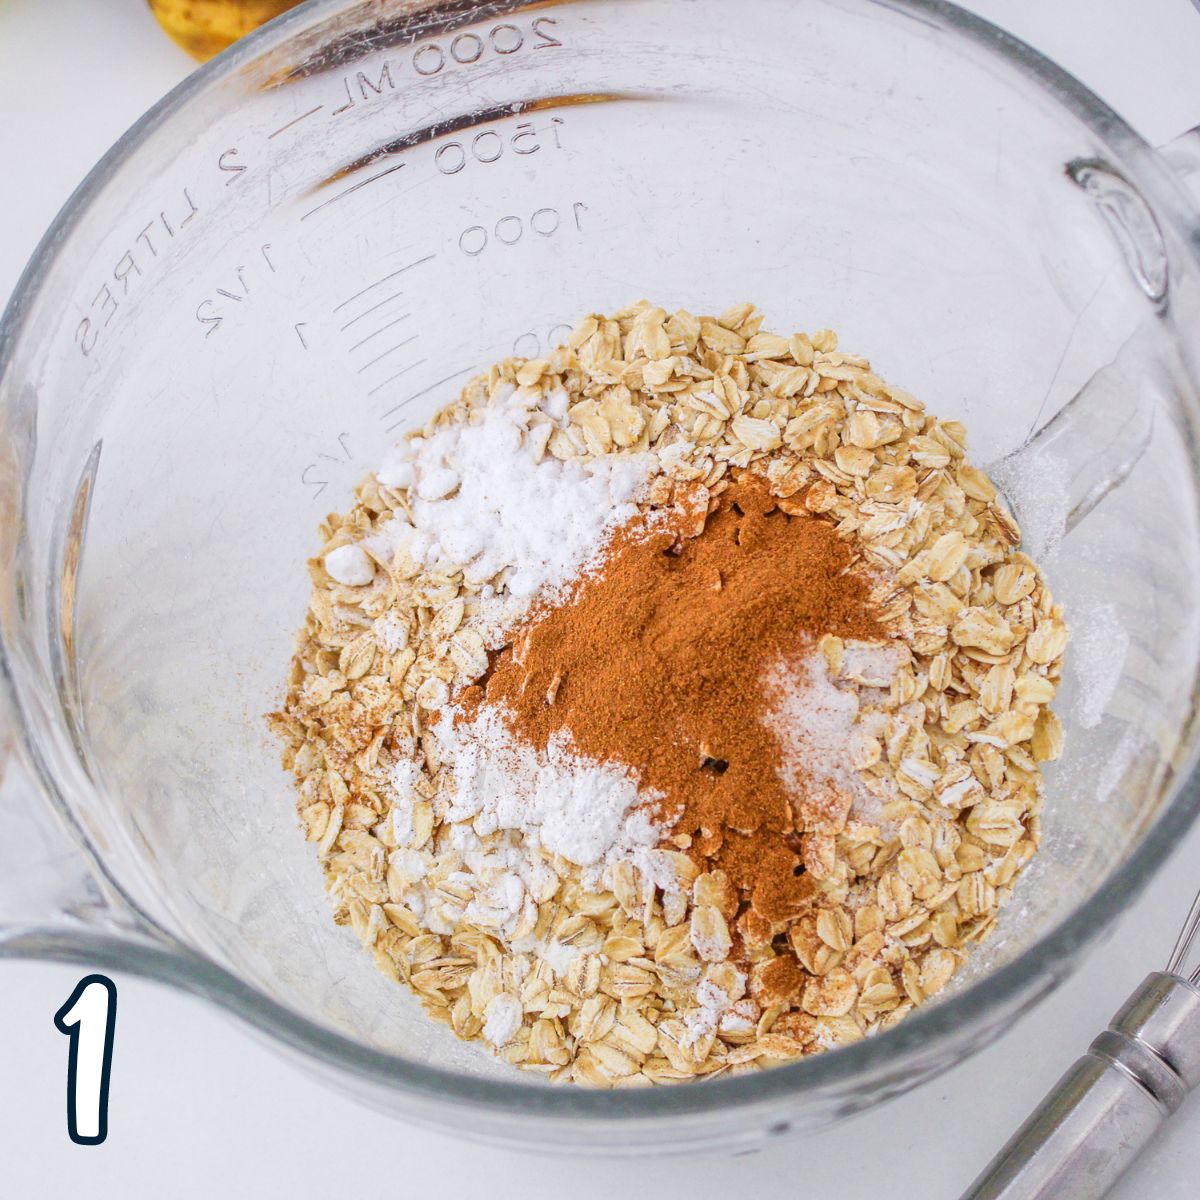 Oats and cinnamon in a glass bowl.